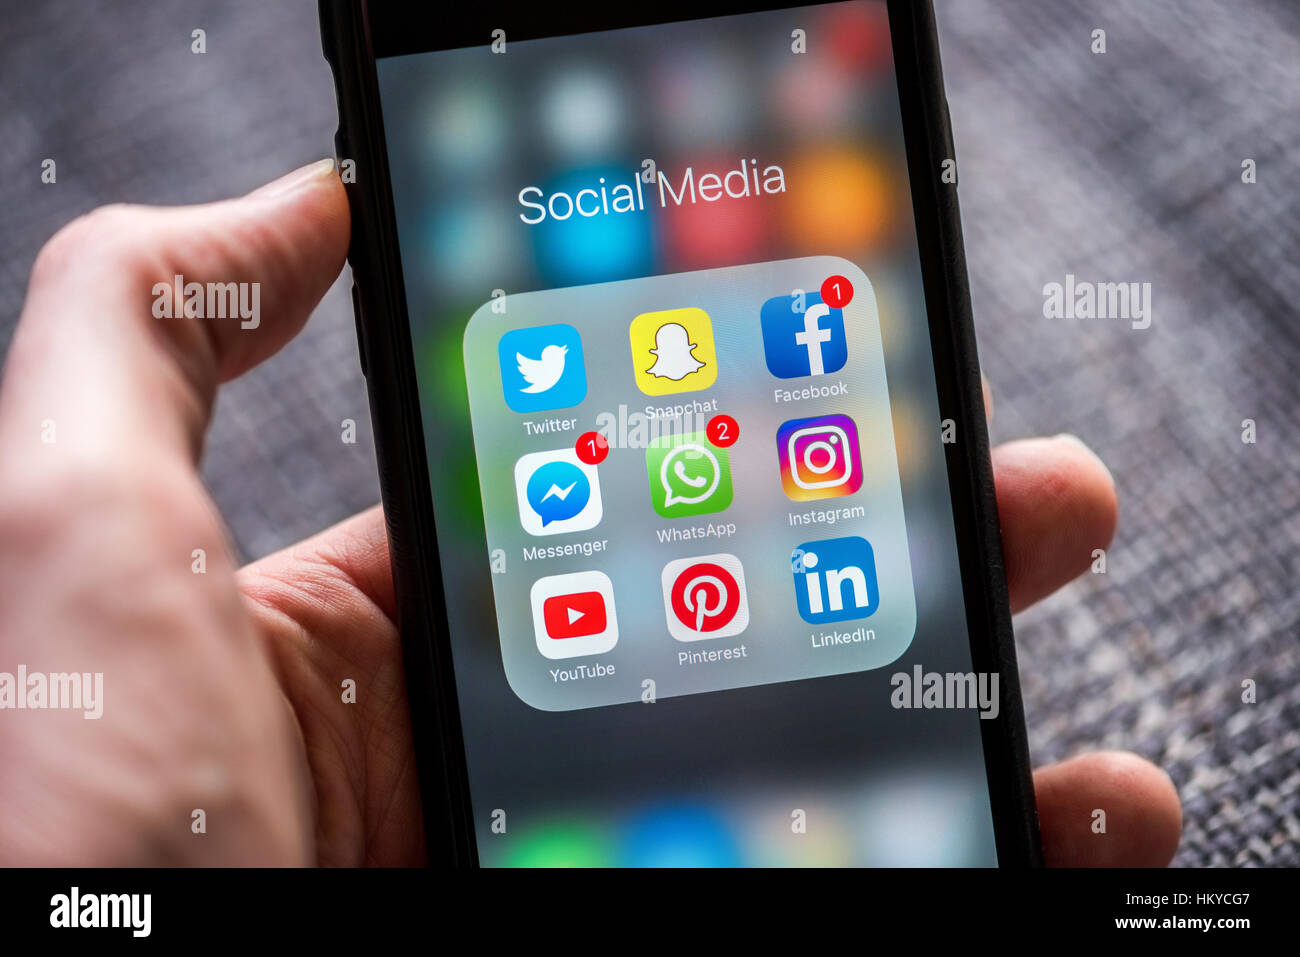 Social media app icons displayed on Apple iPhone Stock Photo